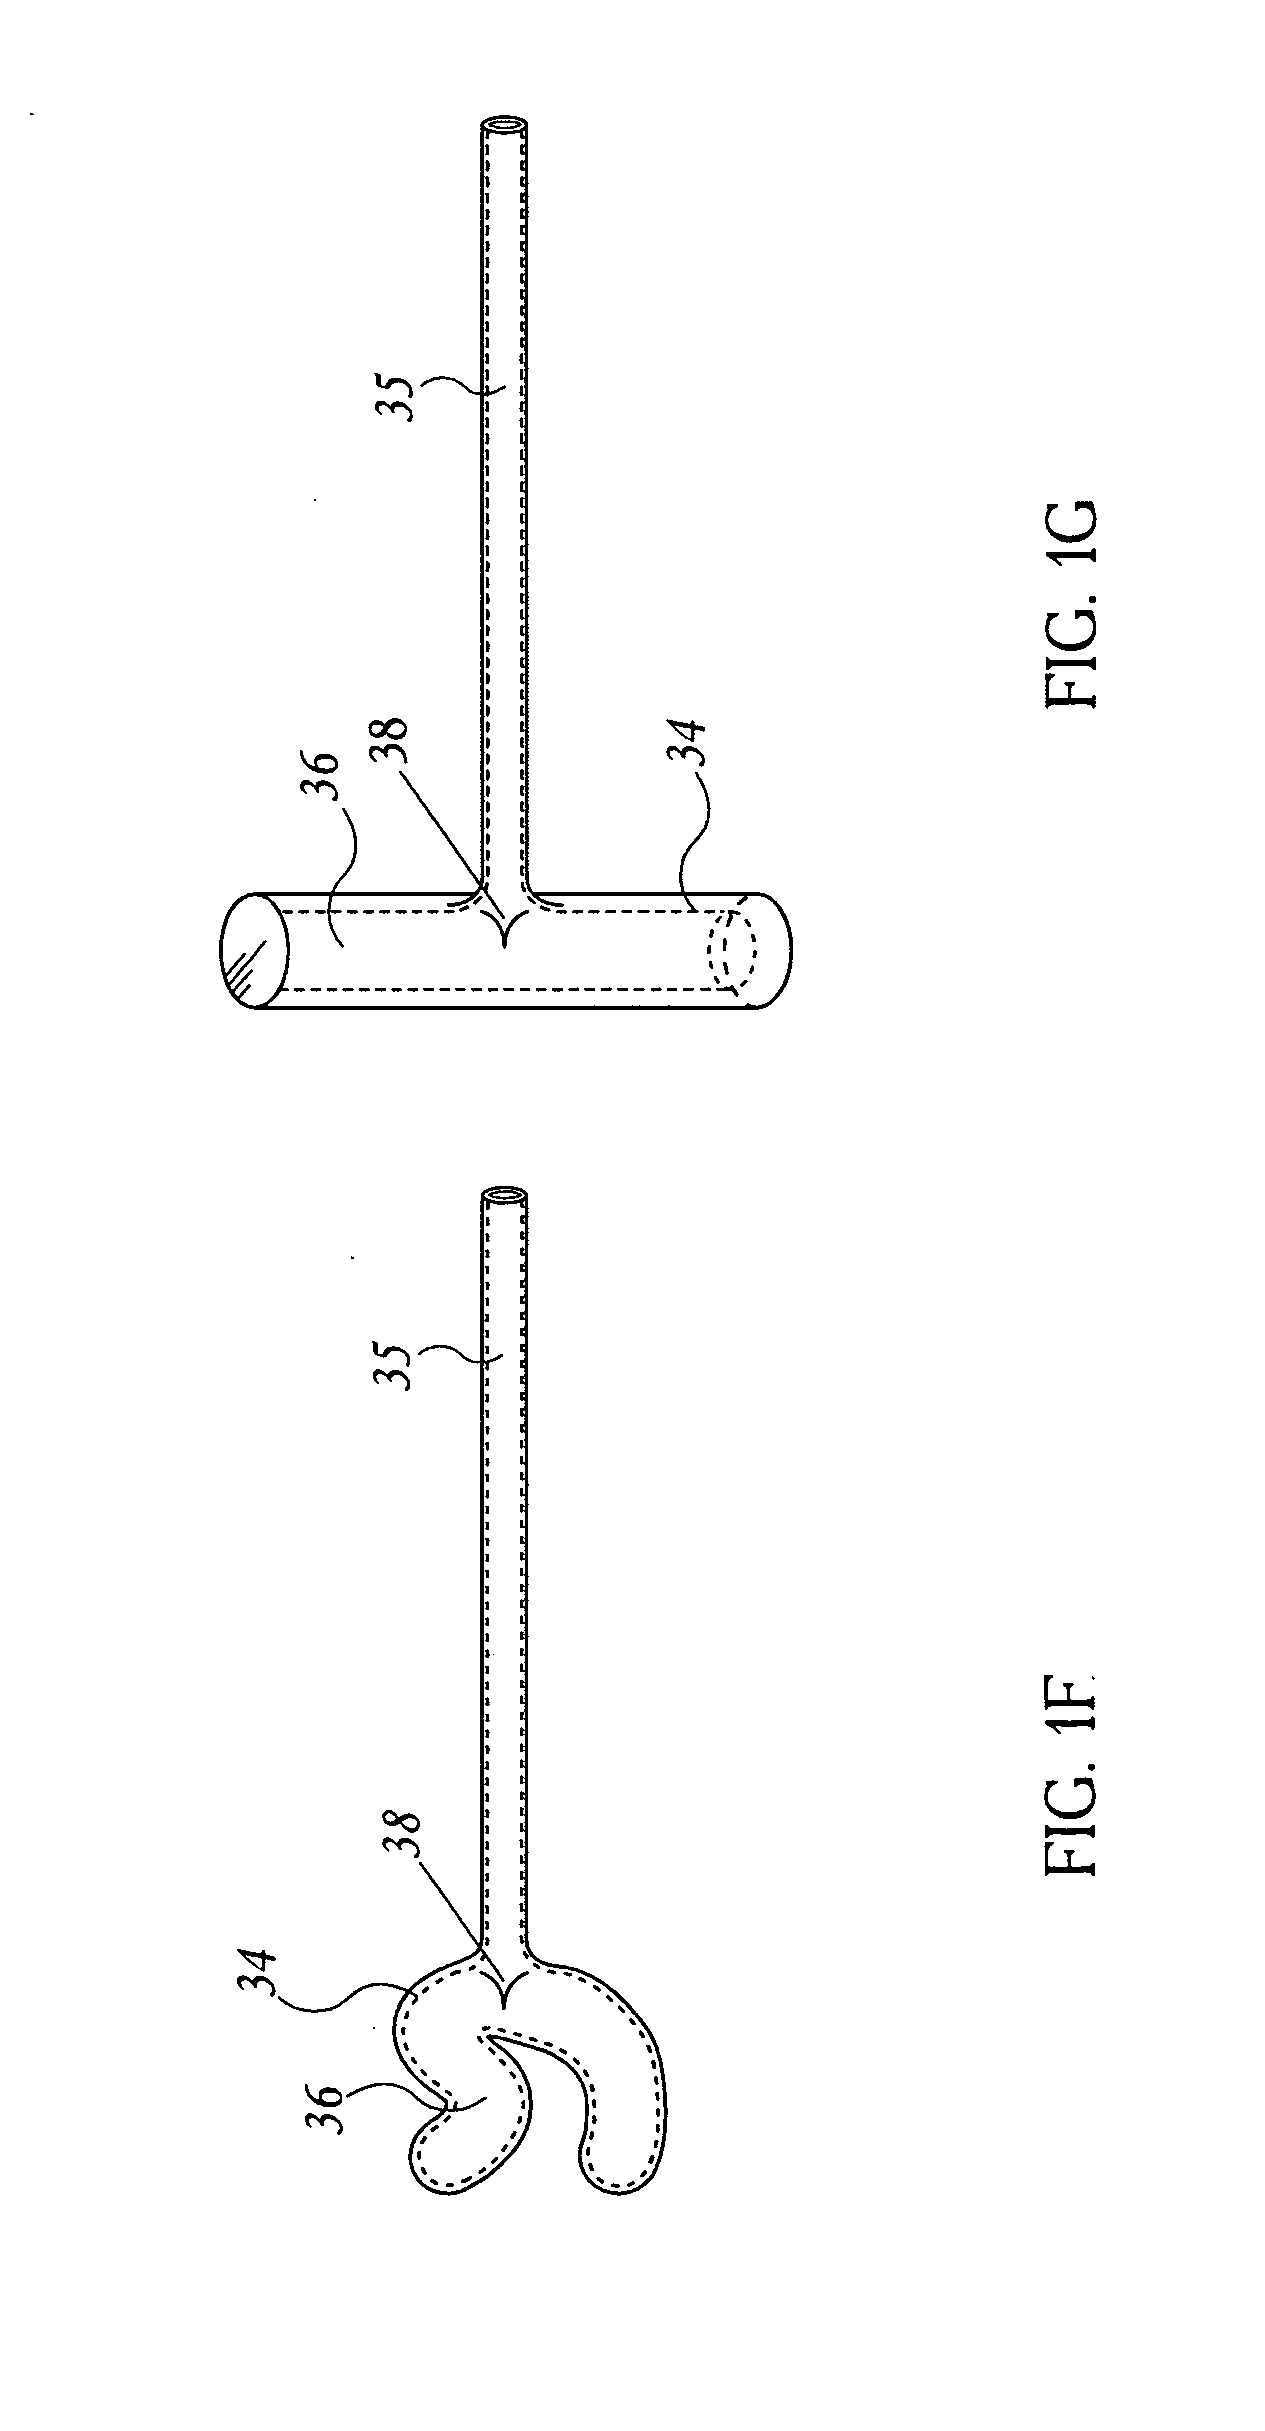 Methods and devices for the surgical creation of satiety and biofeedback pathways